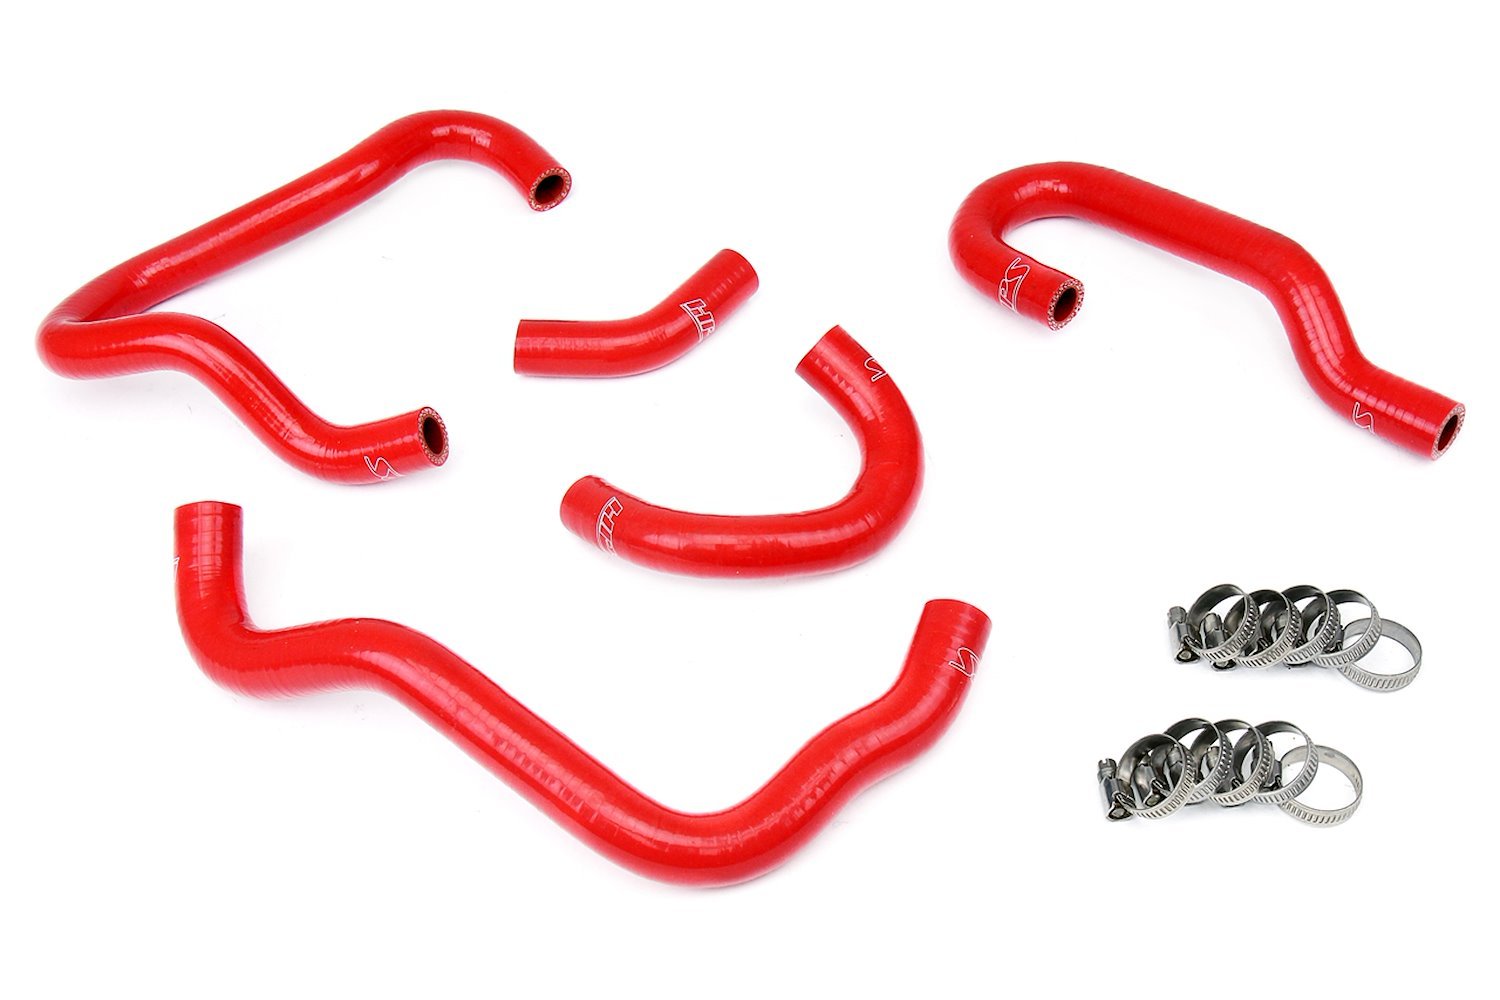 57-1415-RED Heater Hose Kit, High-Temp 3-Ply Reinforced Silicone, Replace OEM Rubber Heater Coolant Hoses